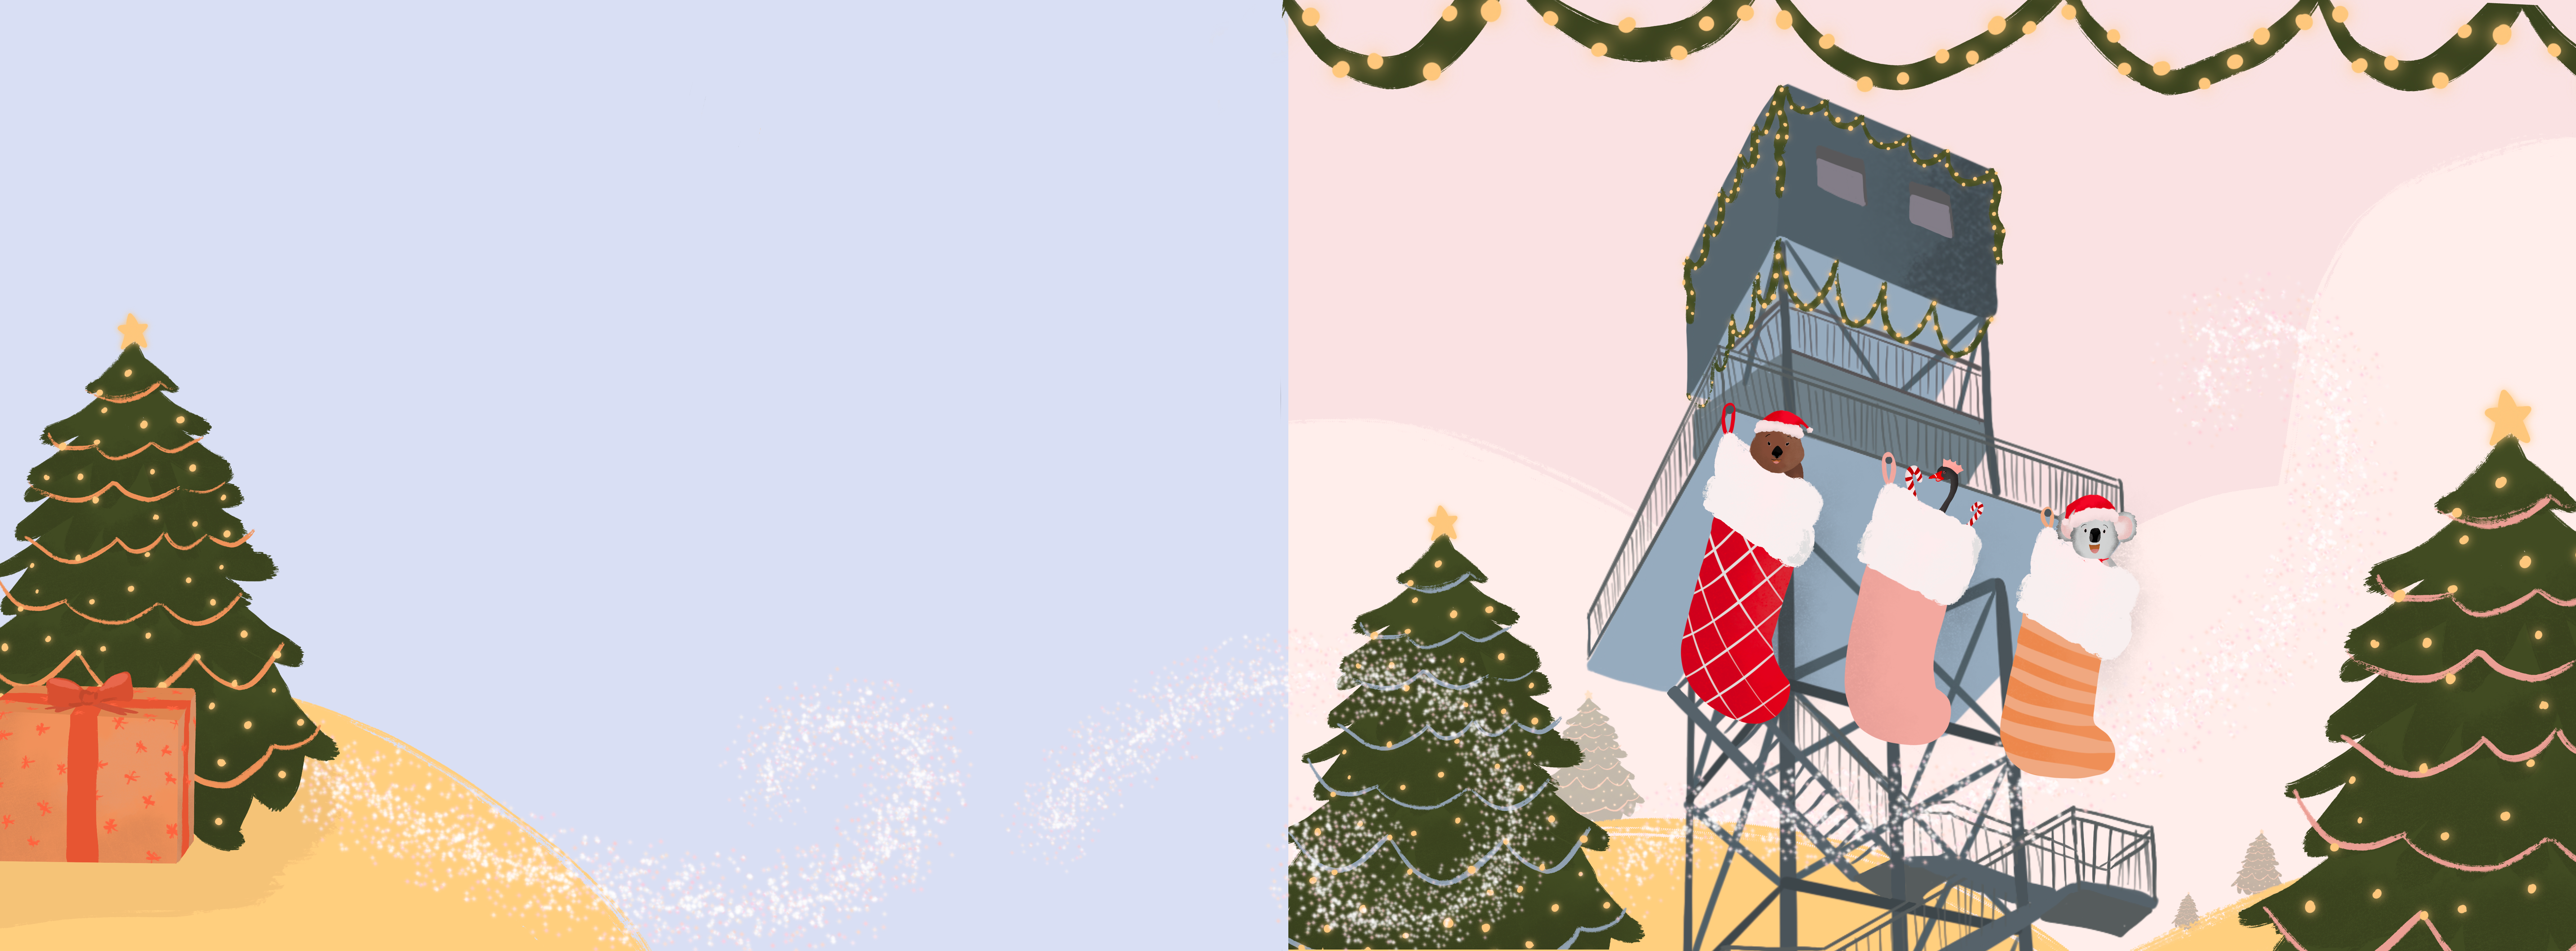 Image of an illustration from the 'Christmas in Ballarat' children's book by Liv Lorkin, depicting a split book spread. One side shows Miss Eccles, Lynnie, and Herbert hanging from the Buninyong Tower in cute Christmas stockings. The opposite page features a Christmas tree with a present under it.